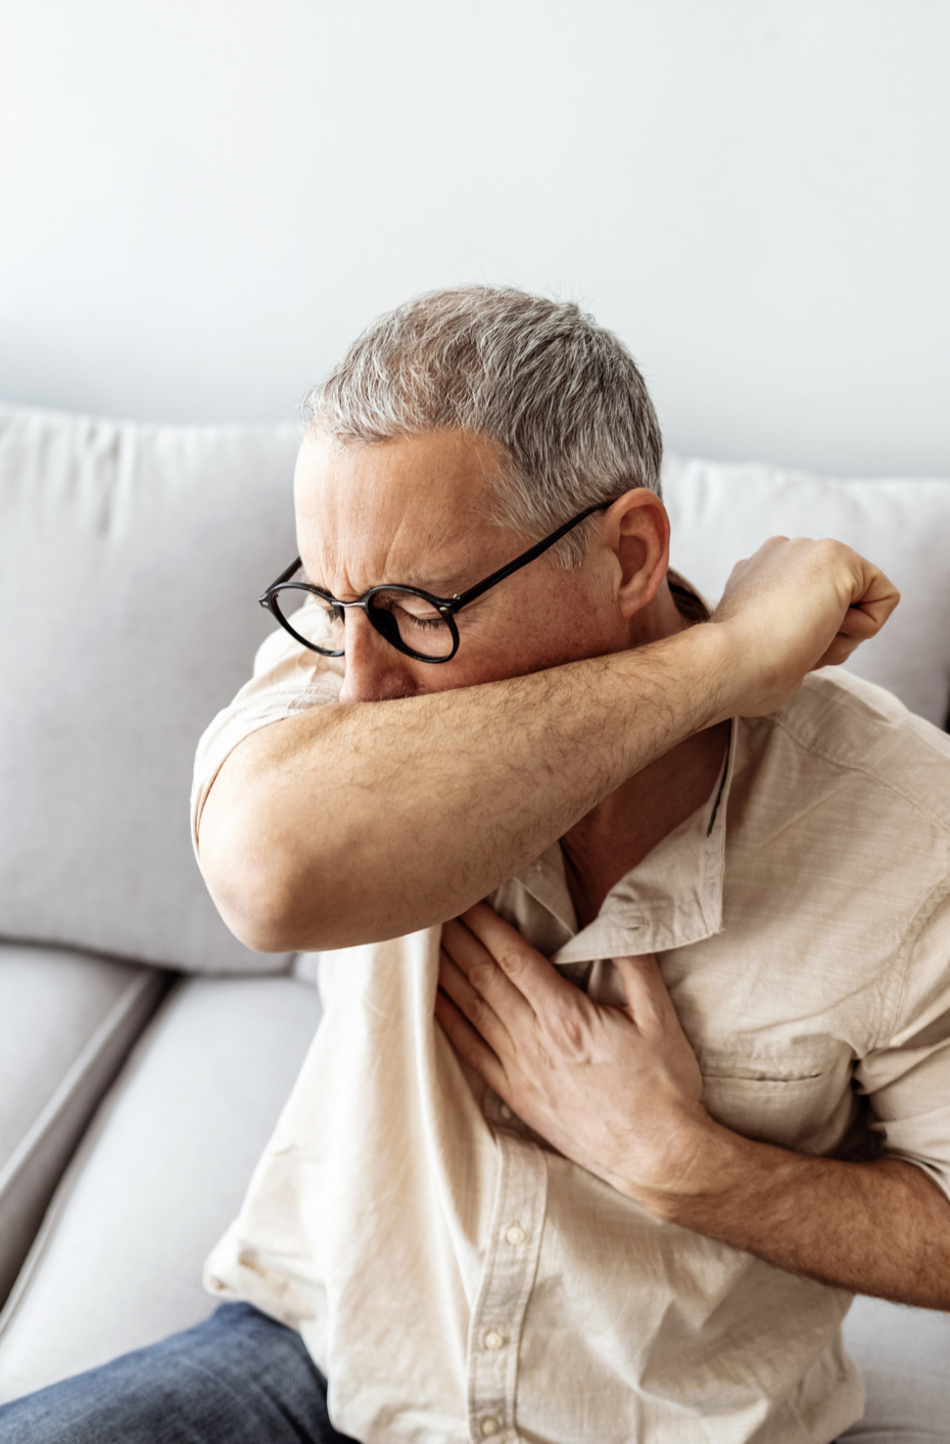 What Could Be Causing Your Chronic Cough?